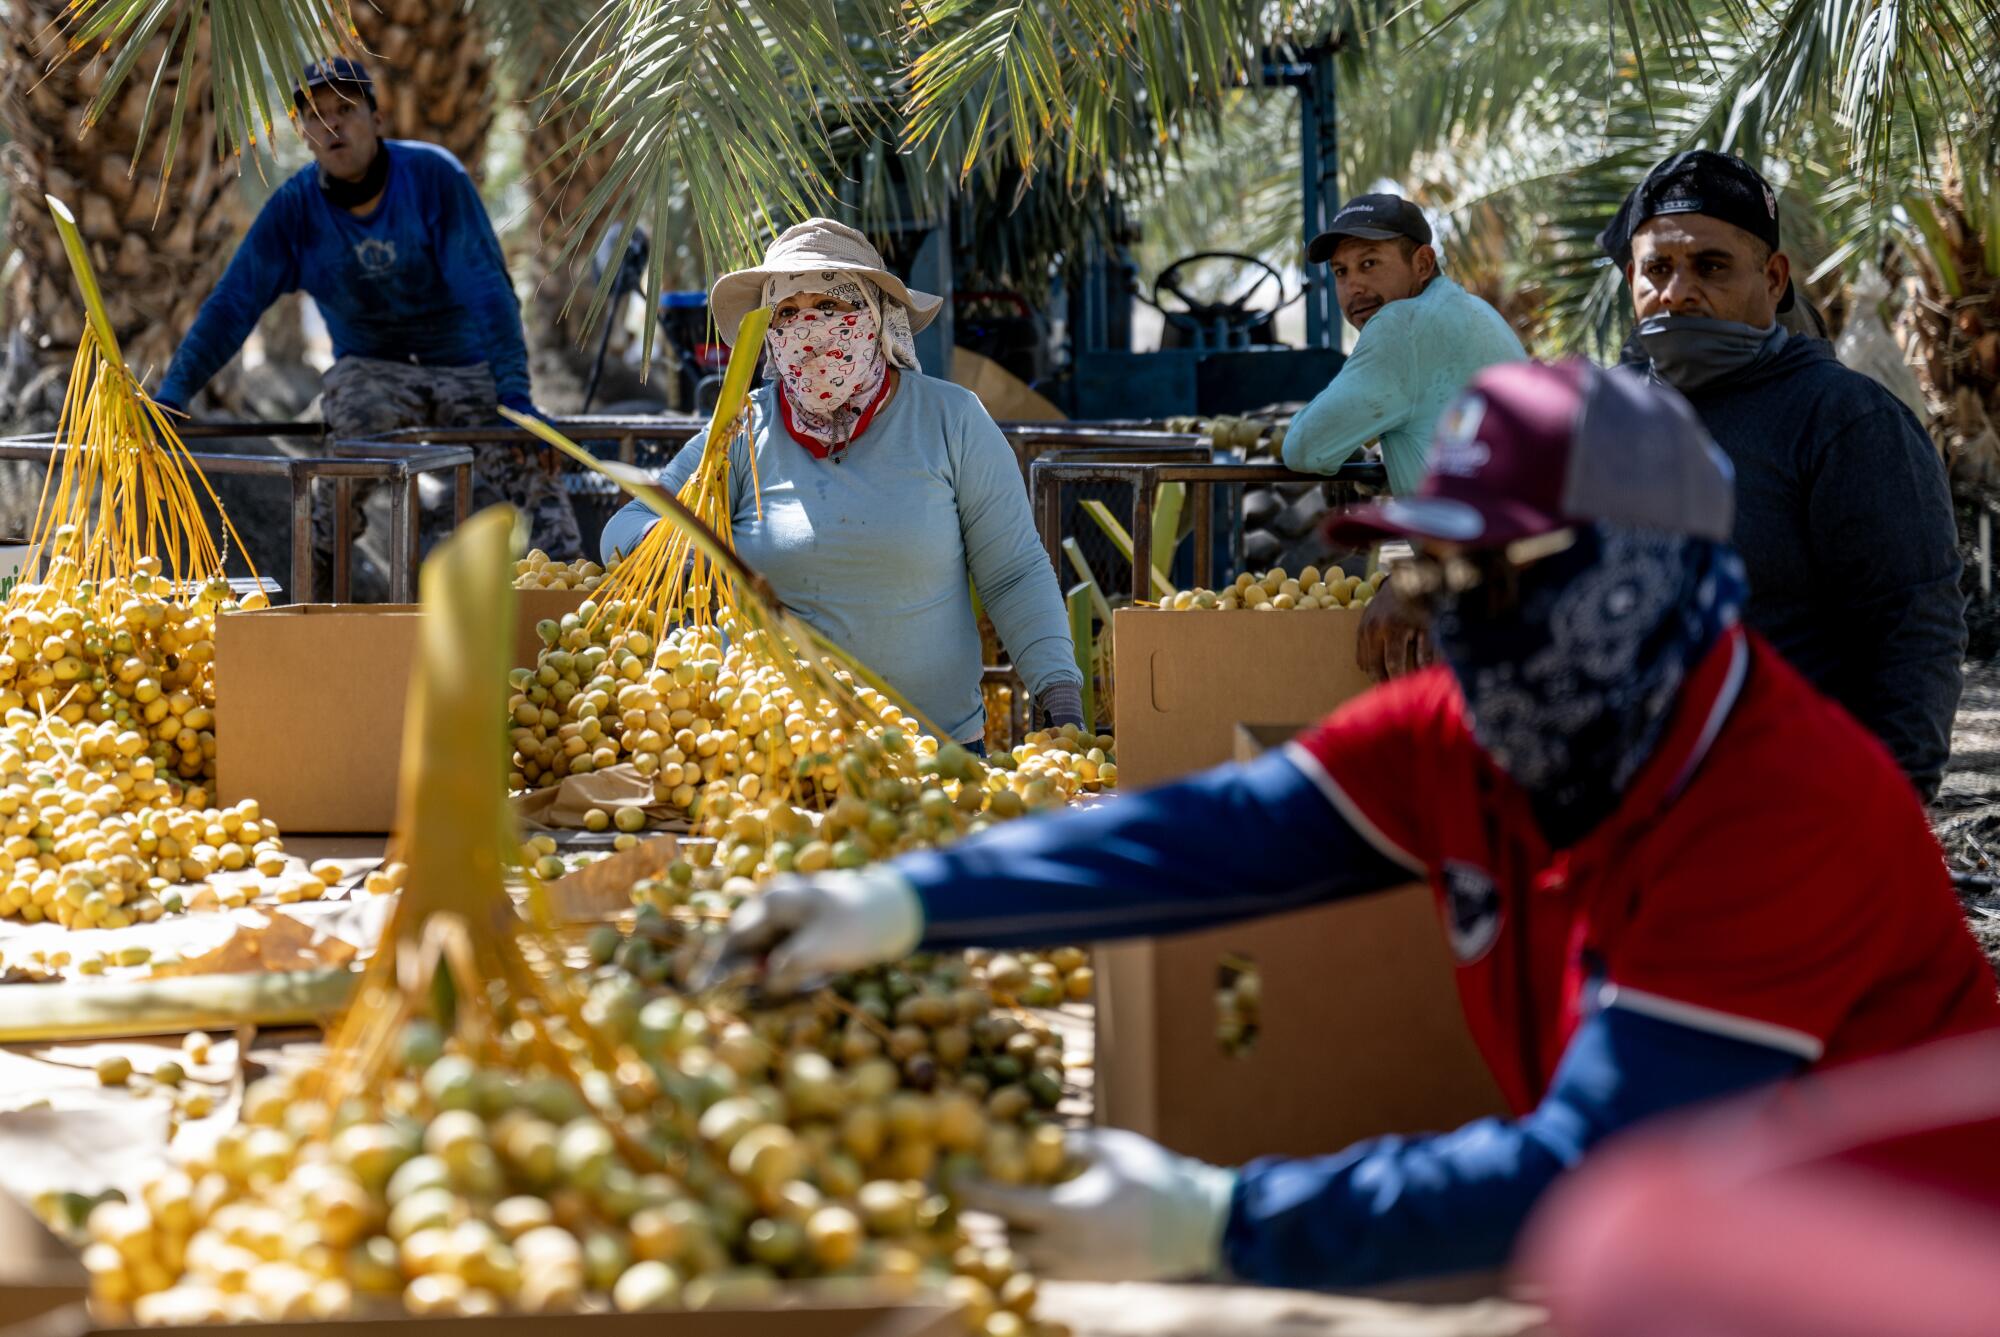 Farmworkers stand at a table outdoors, putting dates in boxes.